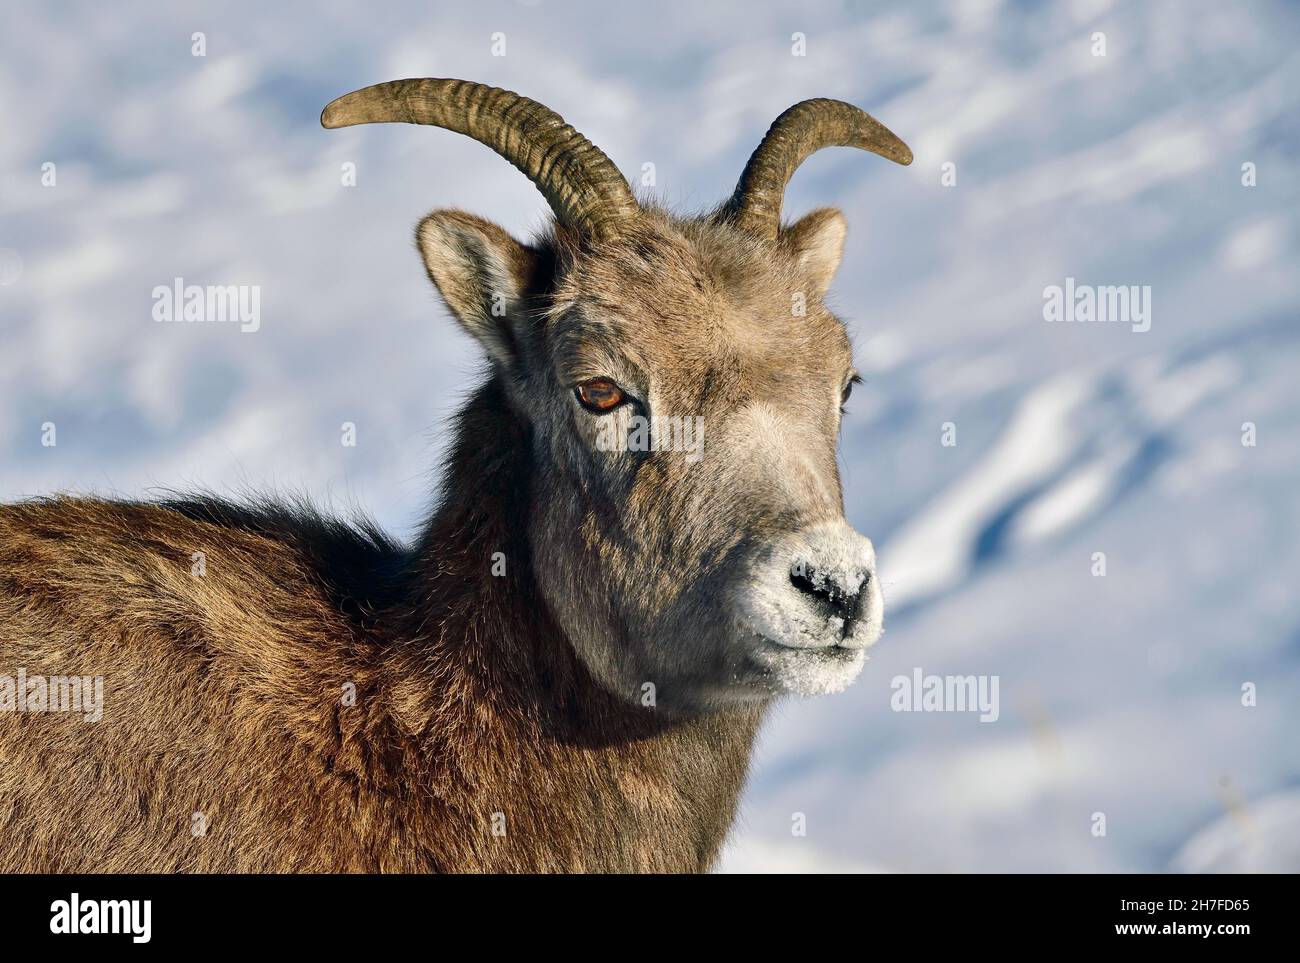 A portrait image of an adult female Bighorn Sheep :Orvis canadensis', standing against the fresh winter snow in rural Alberta Canada Stock Photo